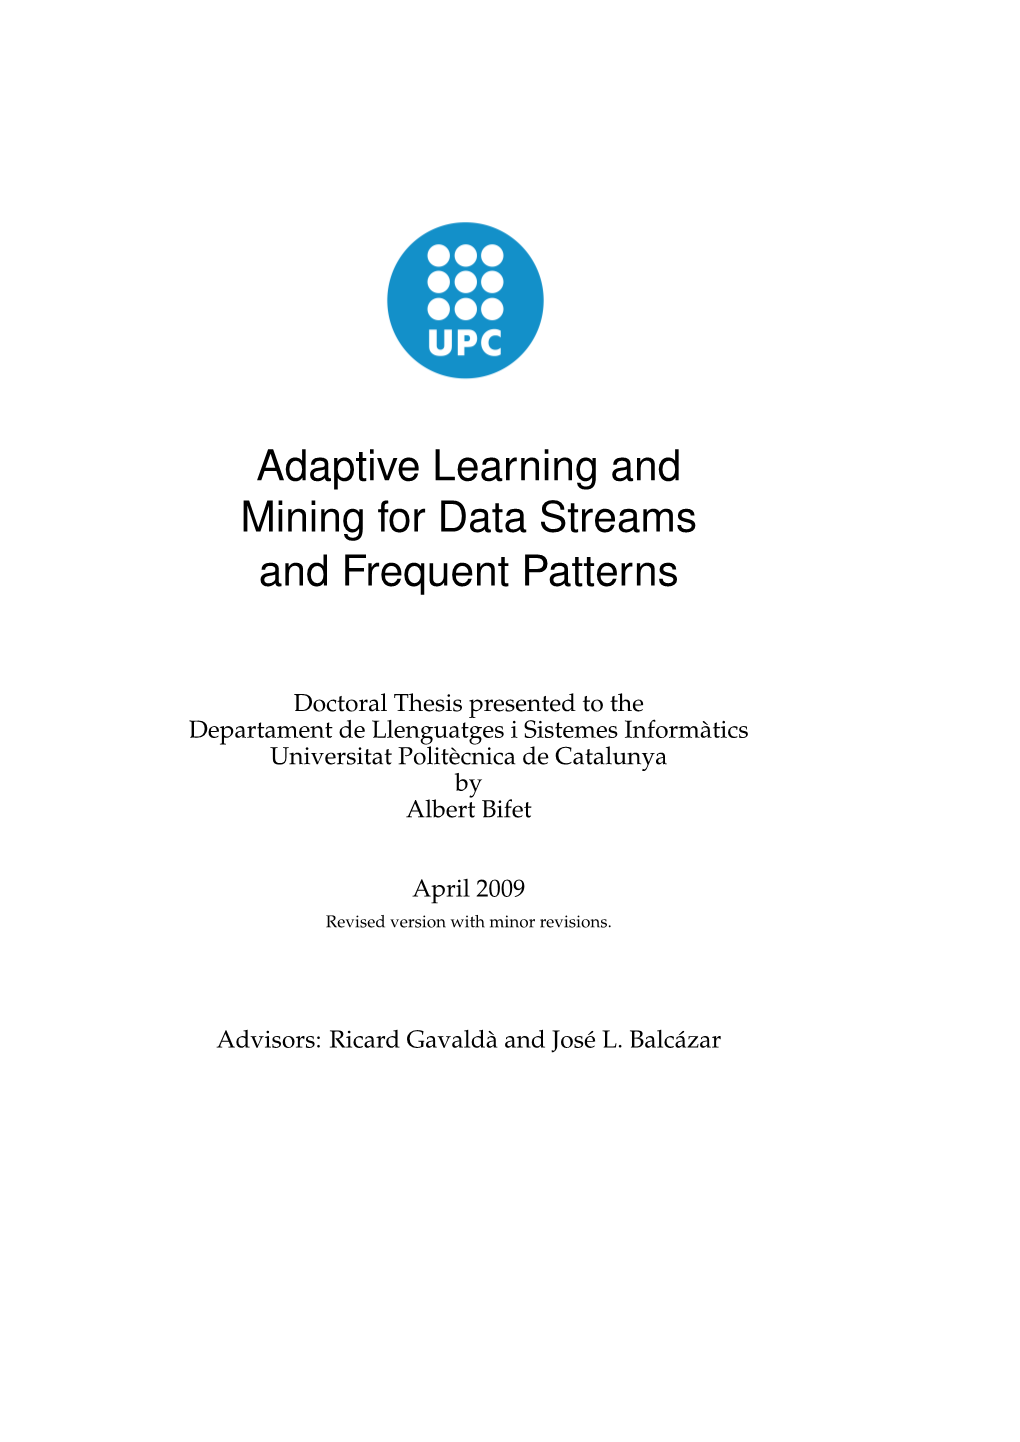 Adaptive Learning and Mining for Data Streams and Frequent Patterns